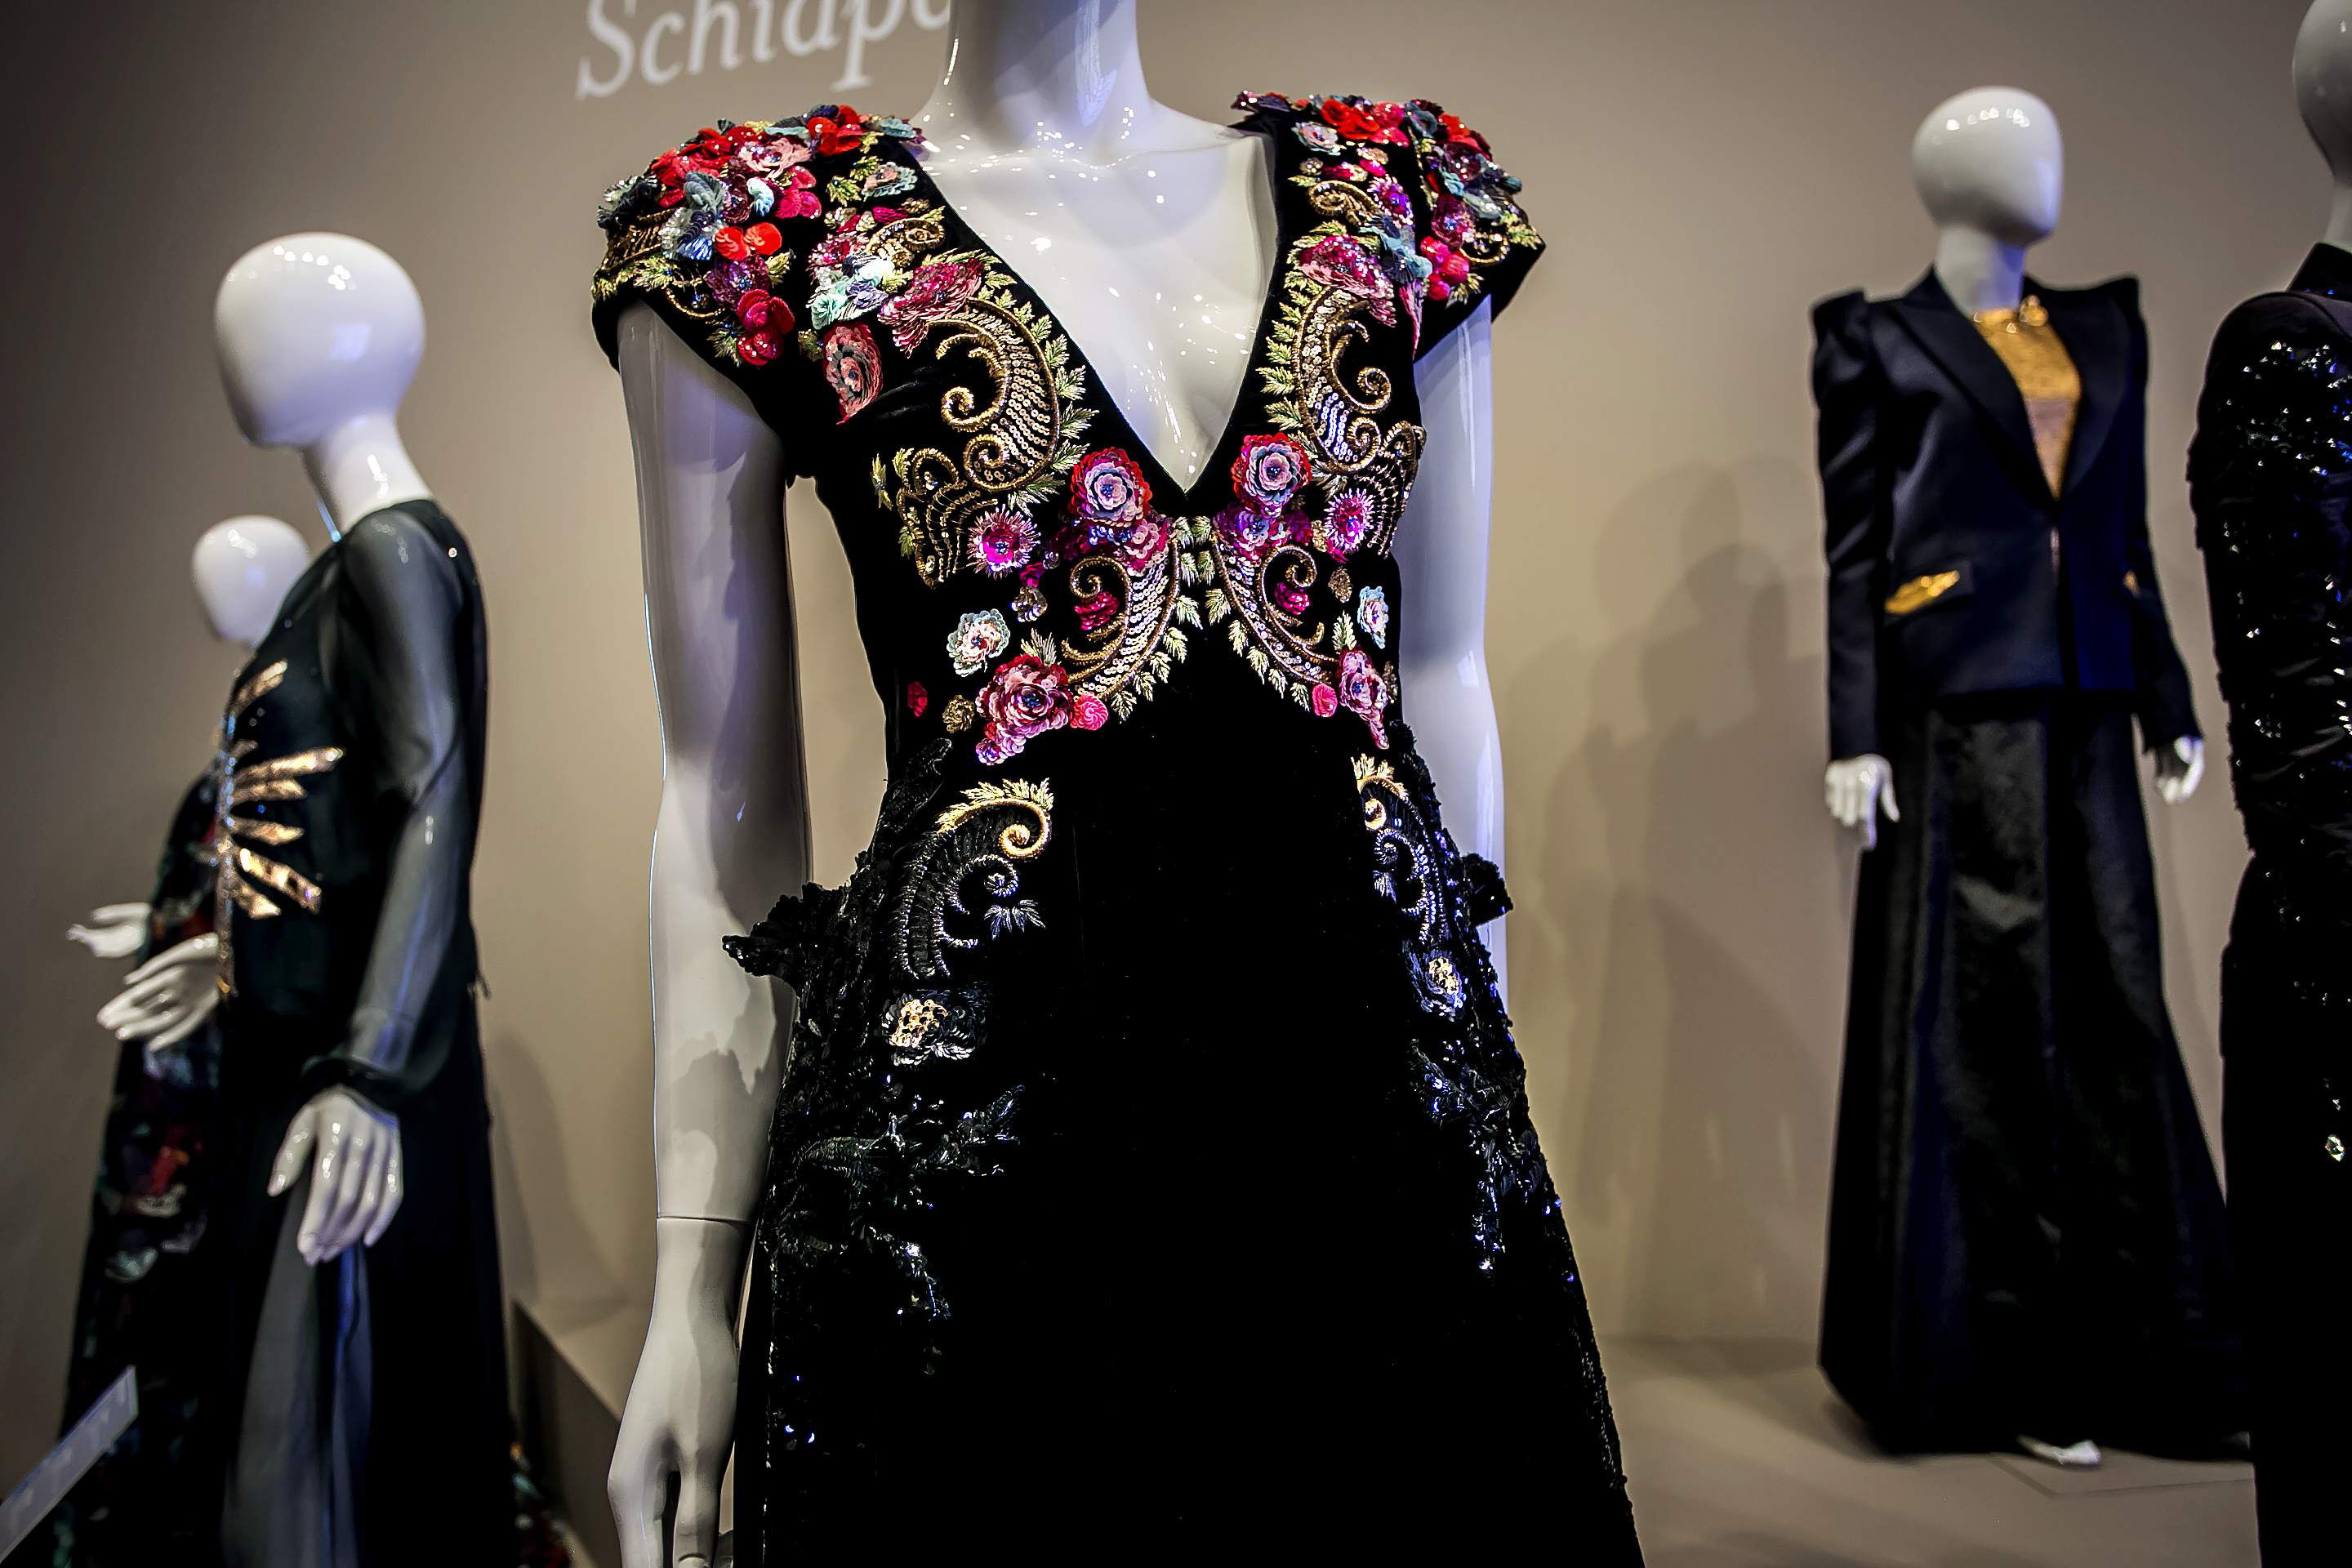 Fashion icon Elsa Schiaparelli is remembered and reborn at the